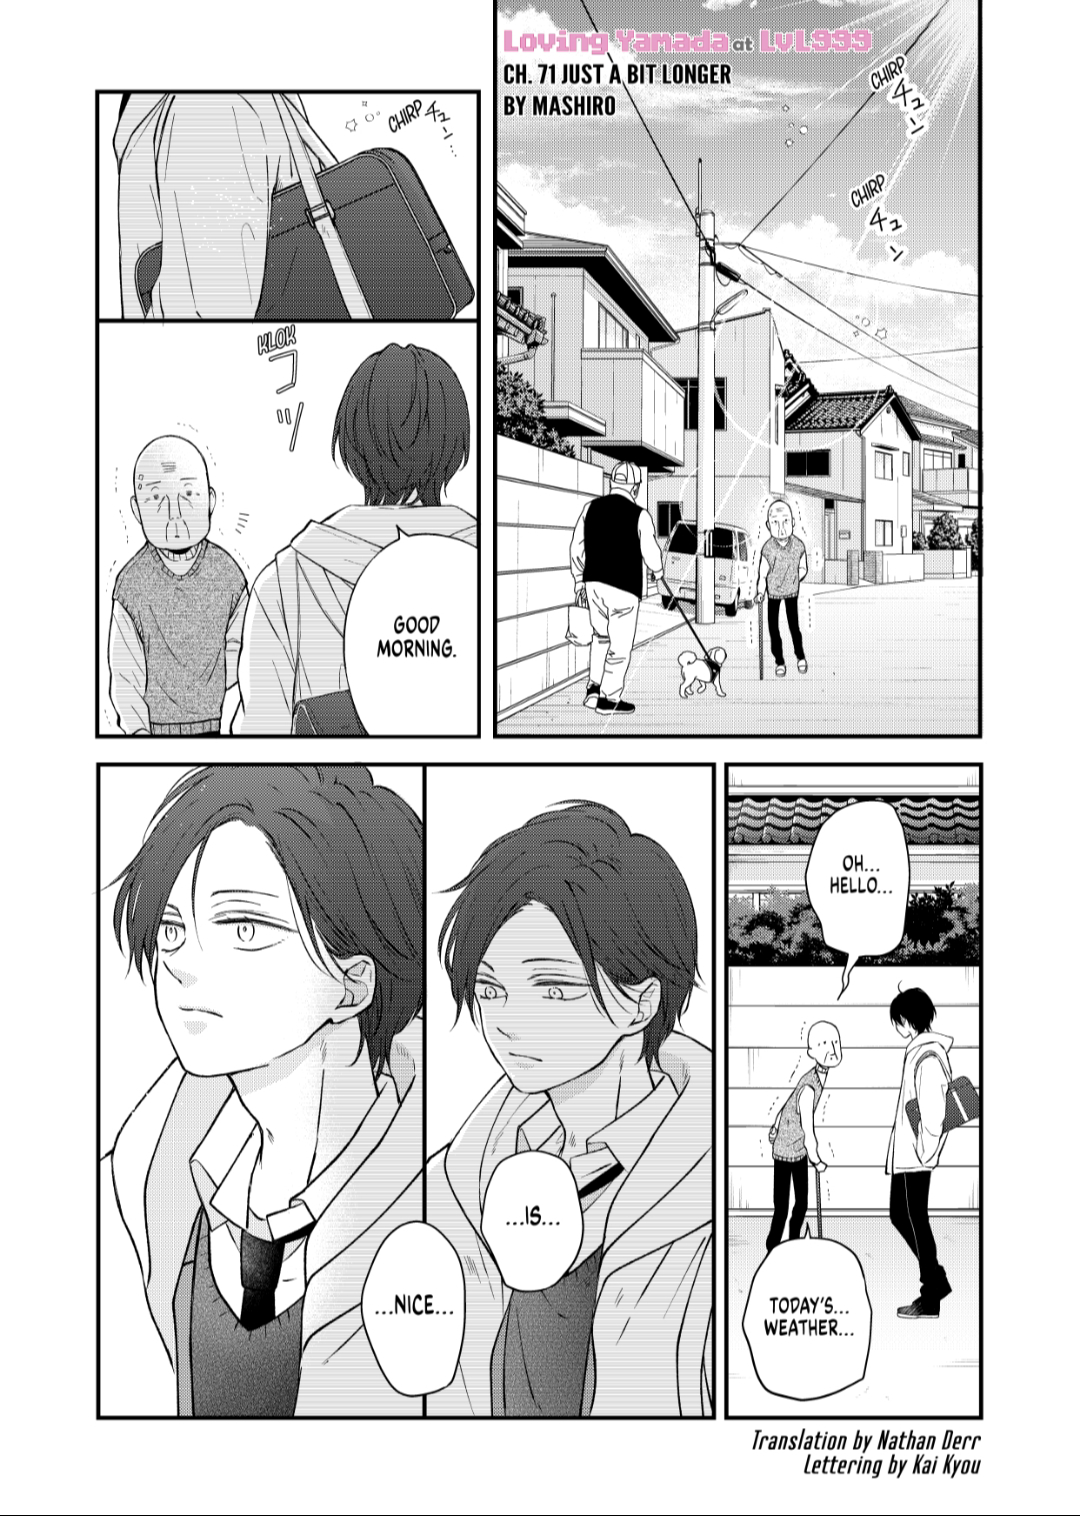 Chapter 93, My Love Story with Yamada-kun at Lv999